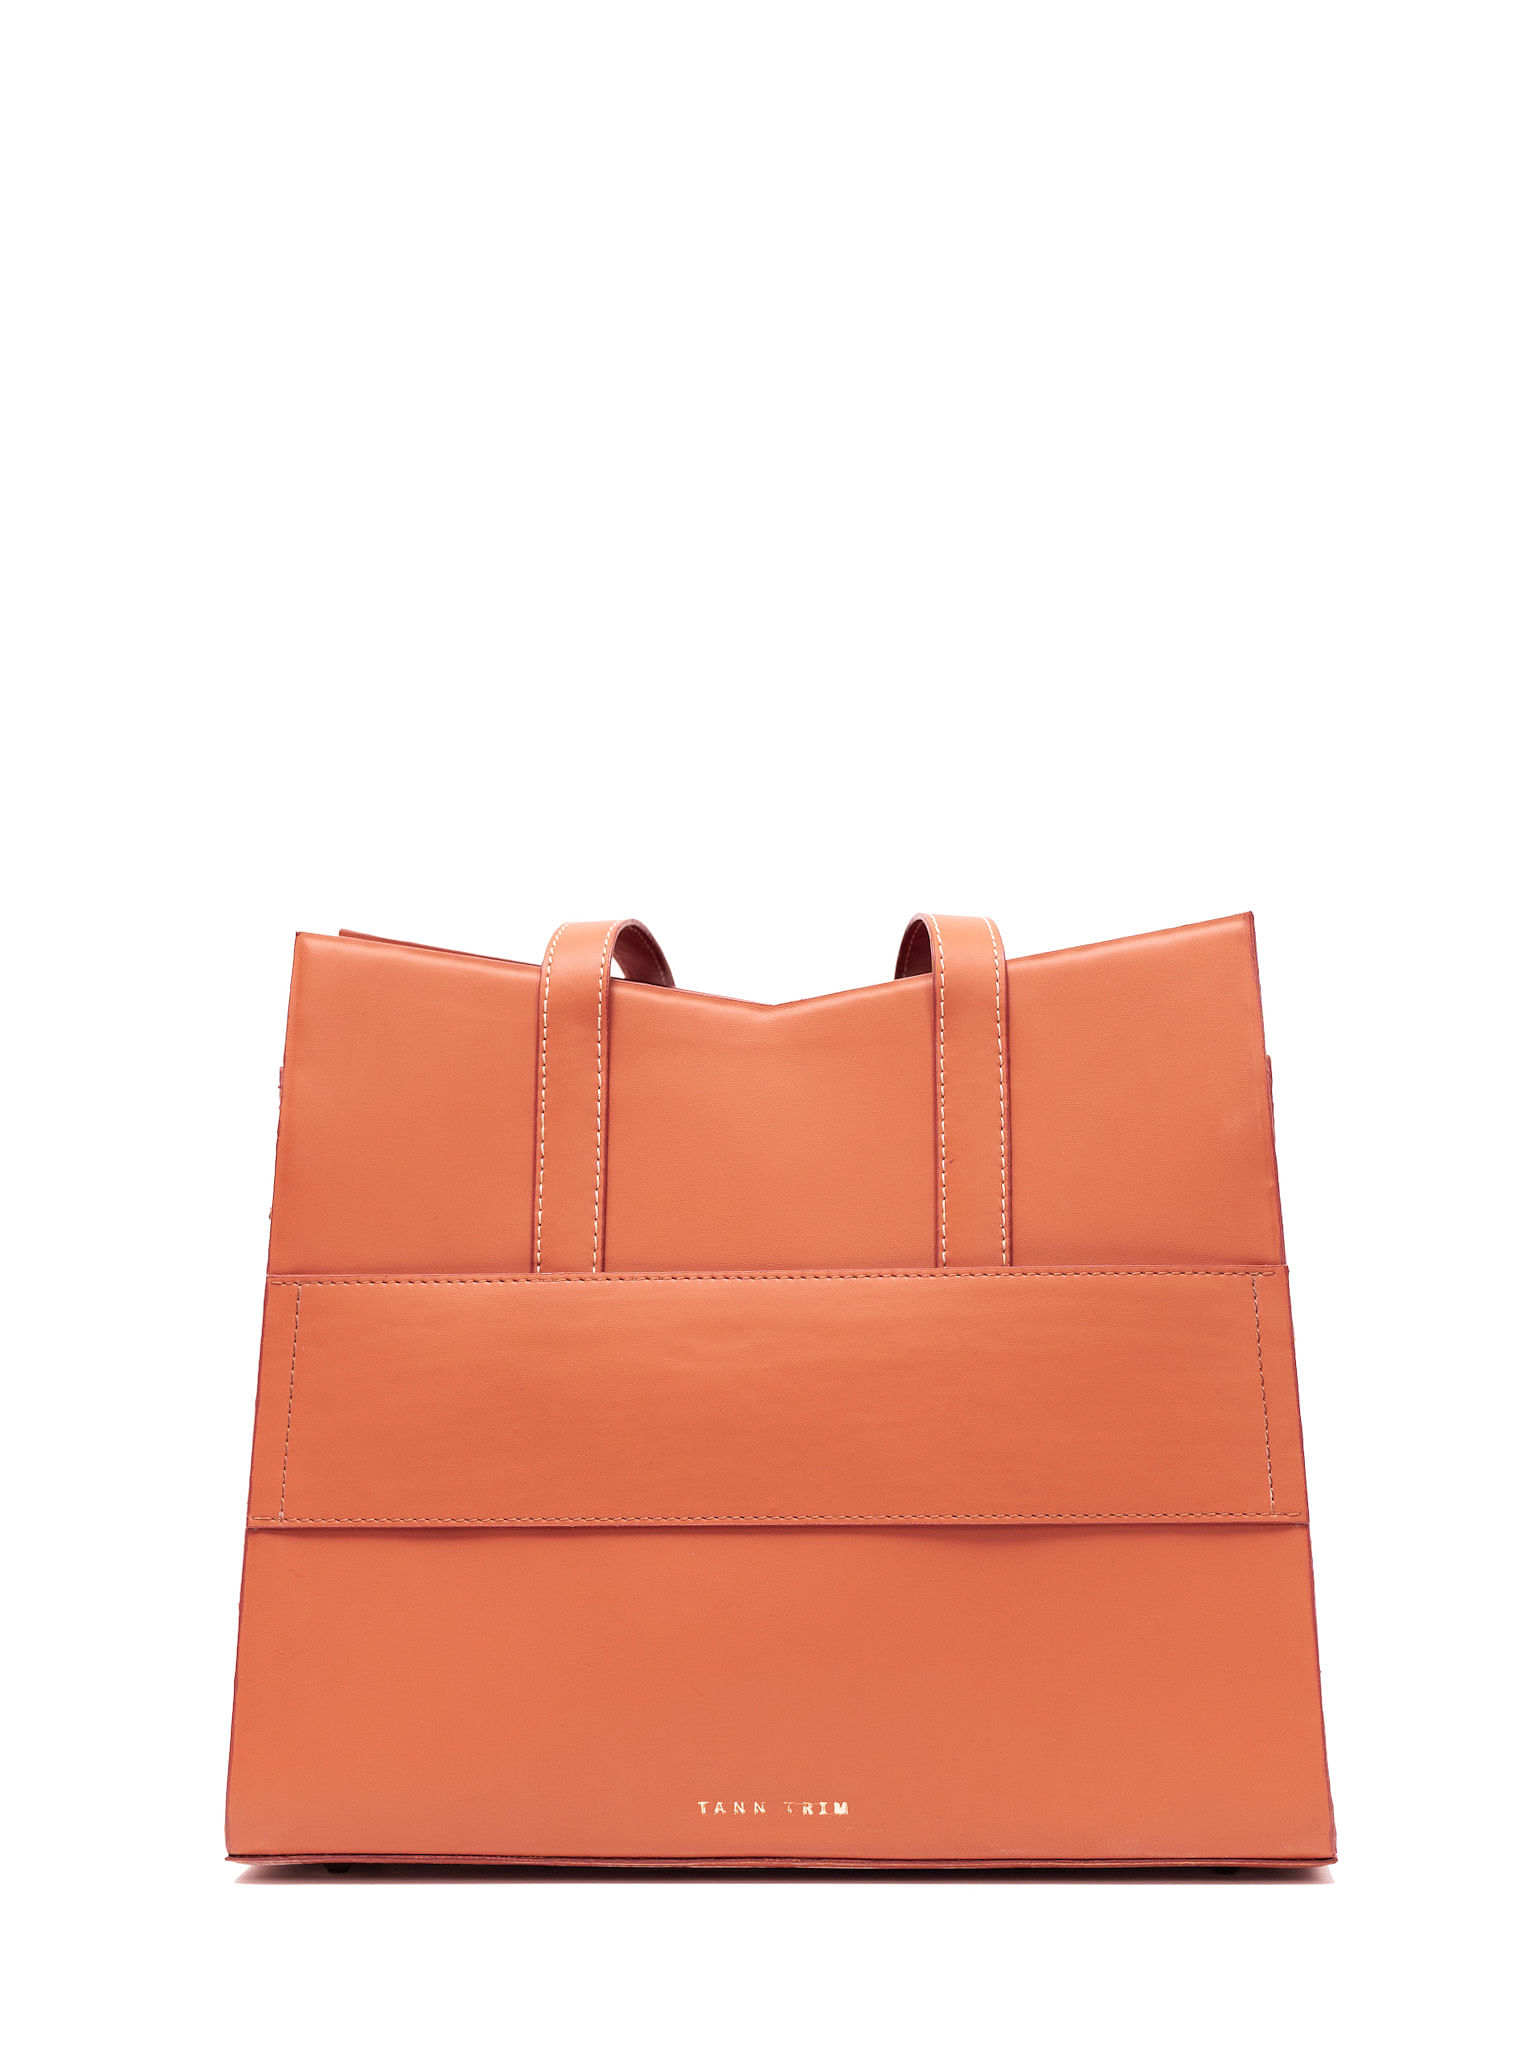 The Chase Tote